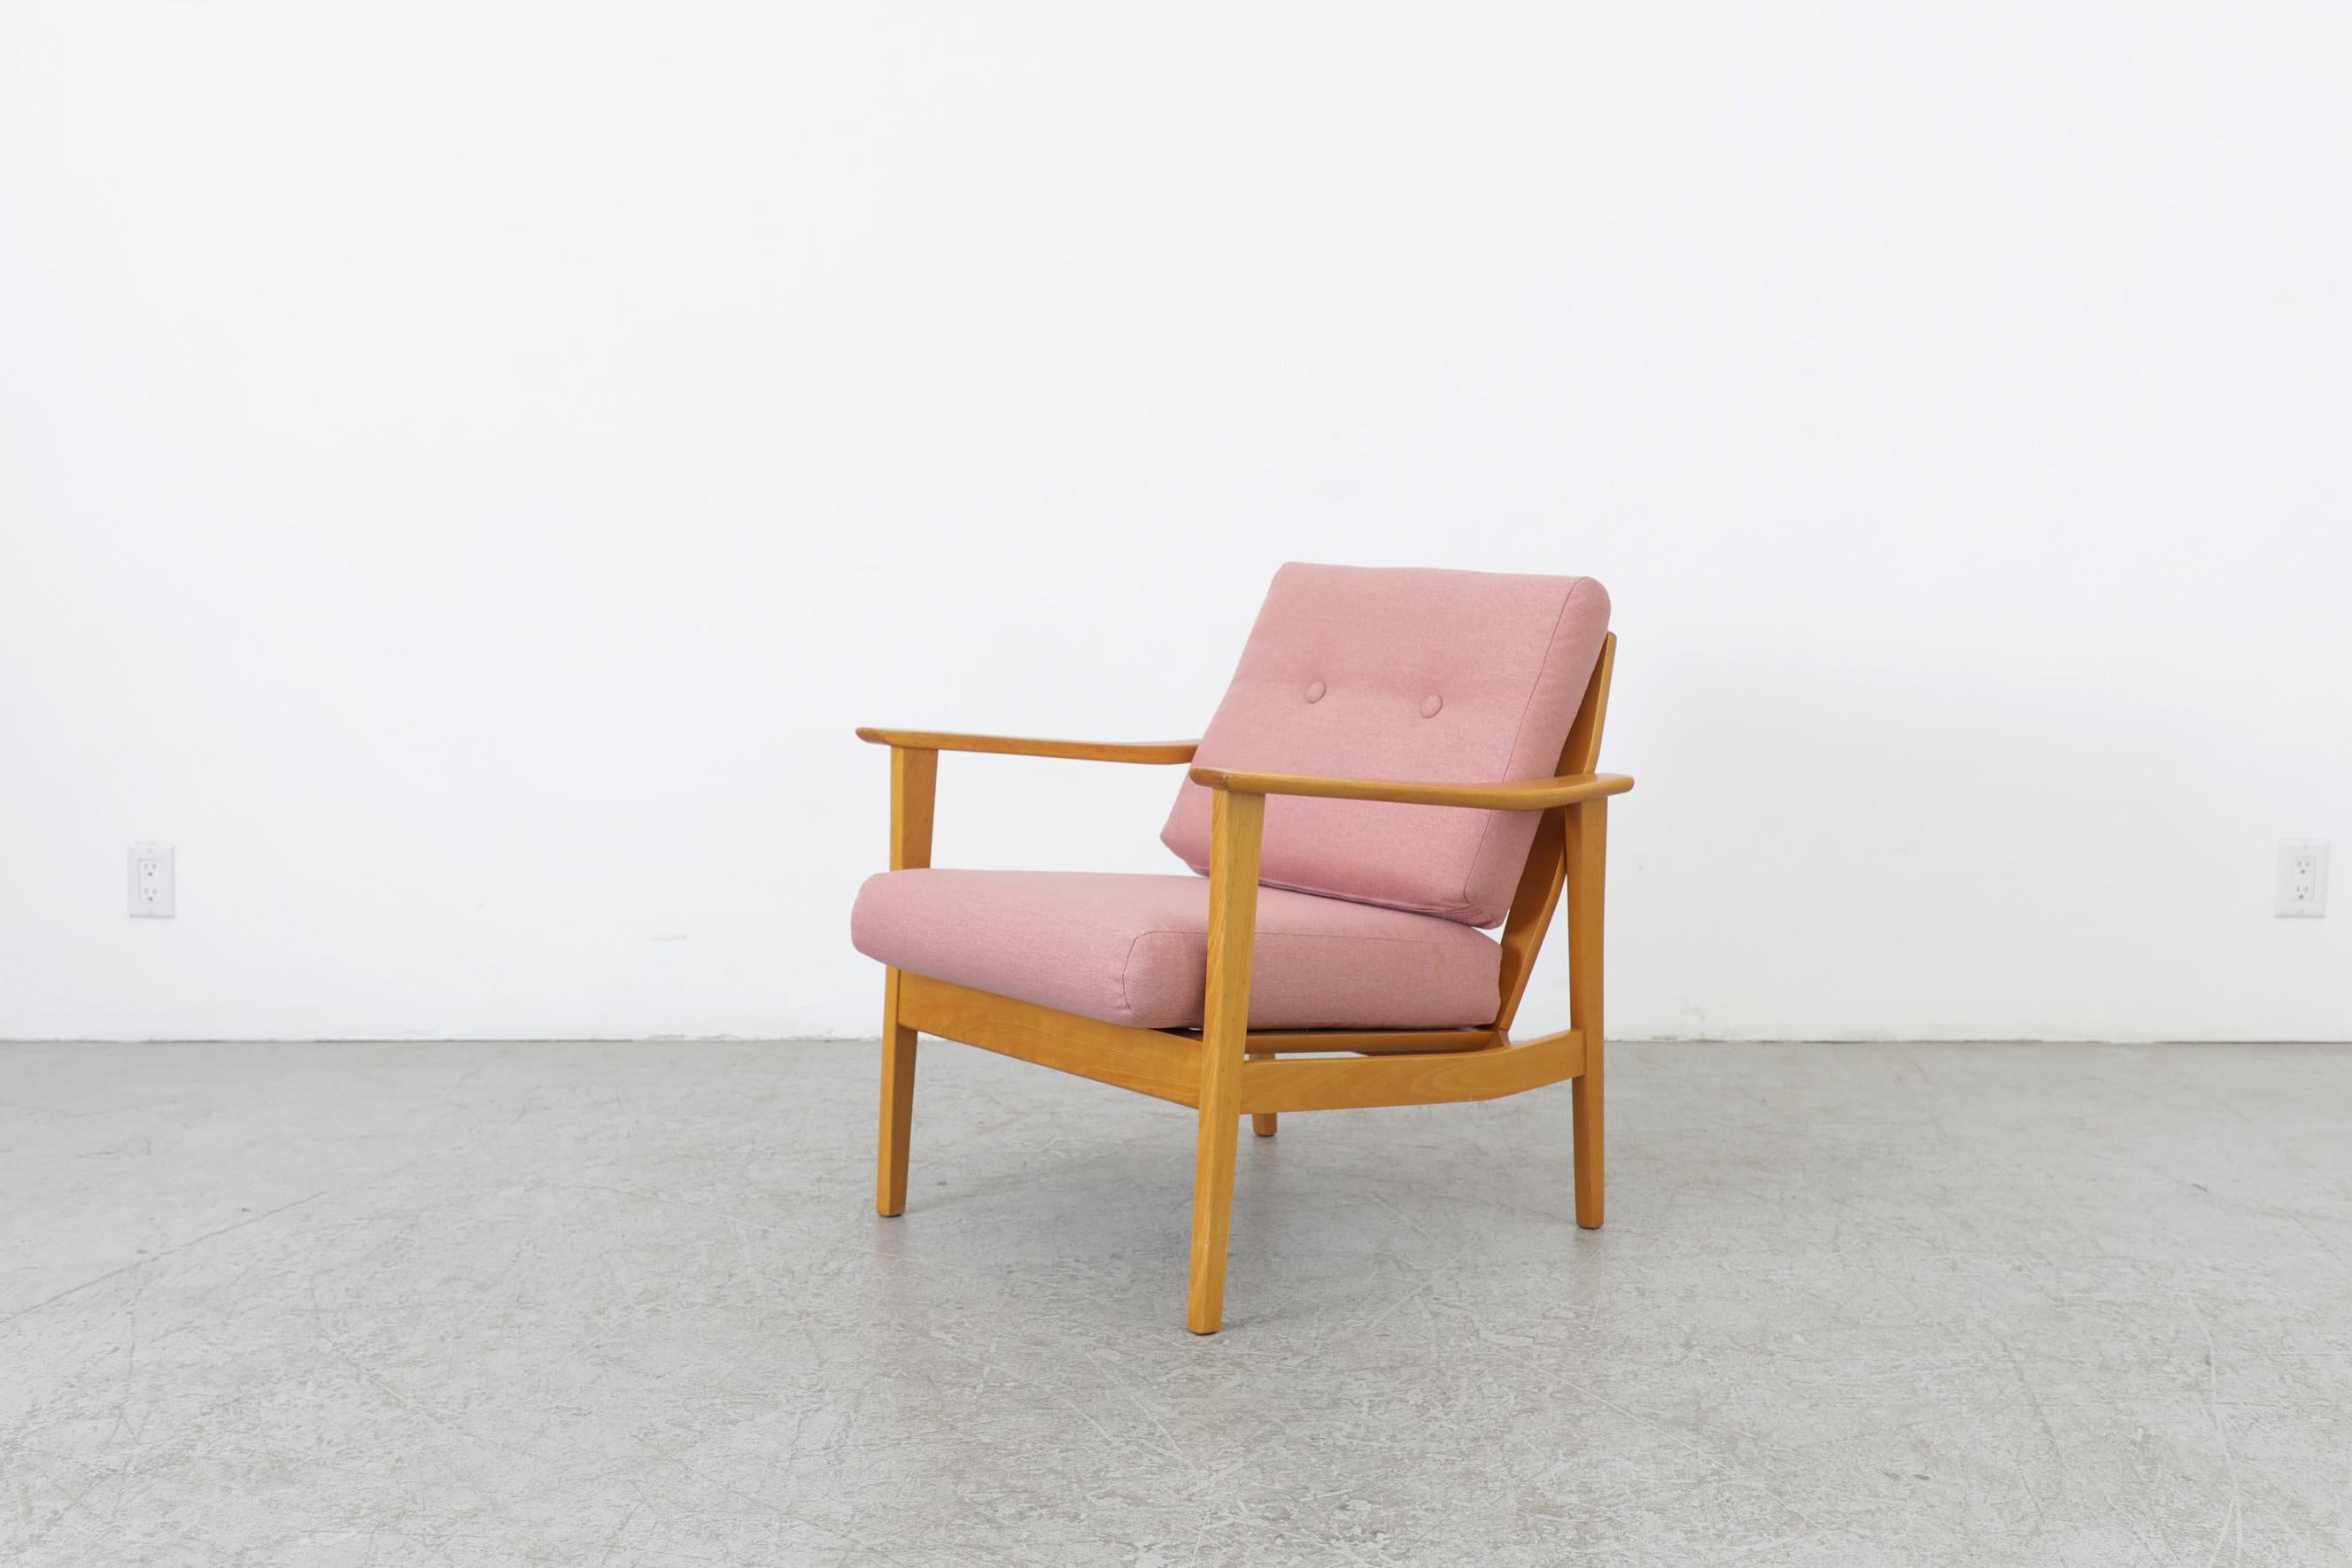 Mid-century blonde wood lounge chair by Knoll with an exposed wood slatted back support and newer pink upholstered cushions. The frame is in good original condition with normal wear consistent with its age and use. A similar set of lounge chairs are